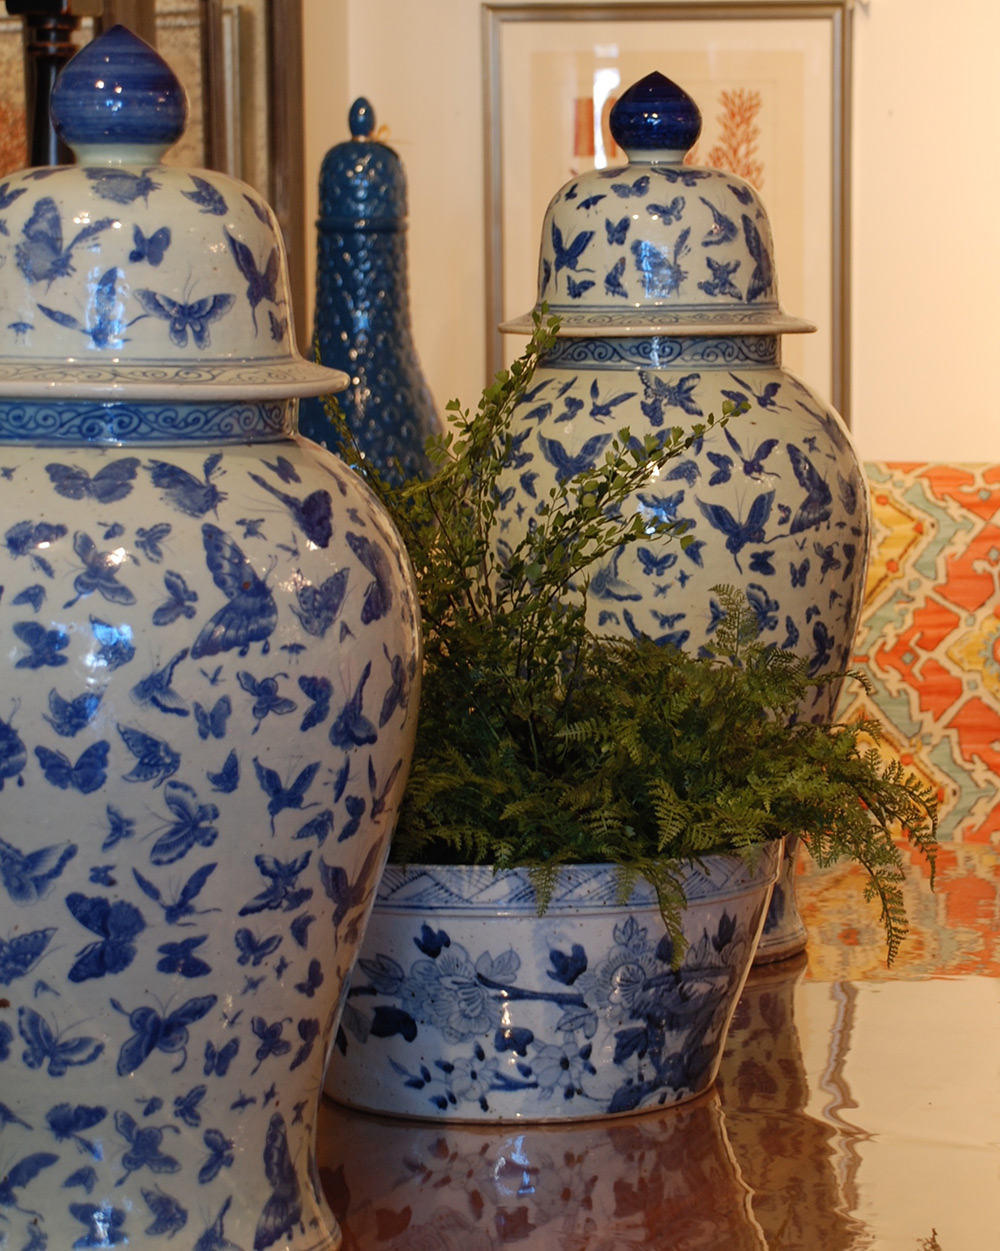 15 Ideas to Use Ginger Jars for Home Decor - A House in the Hills